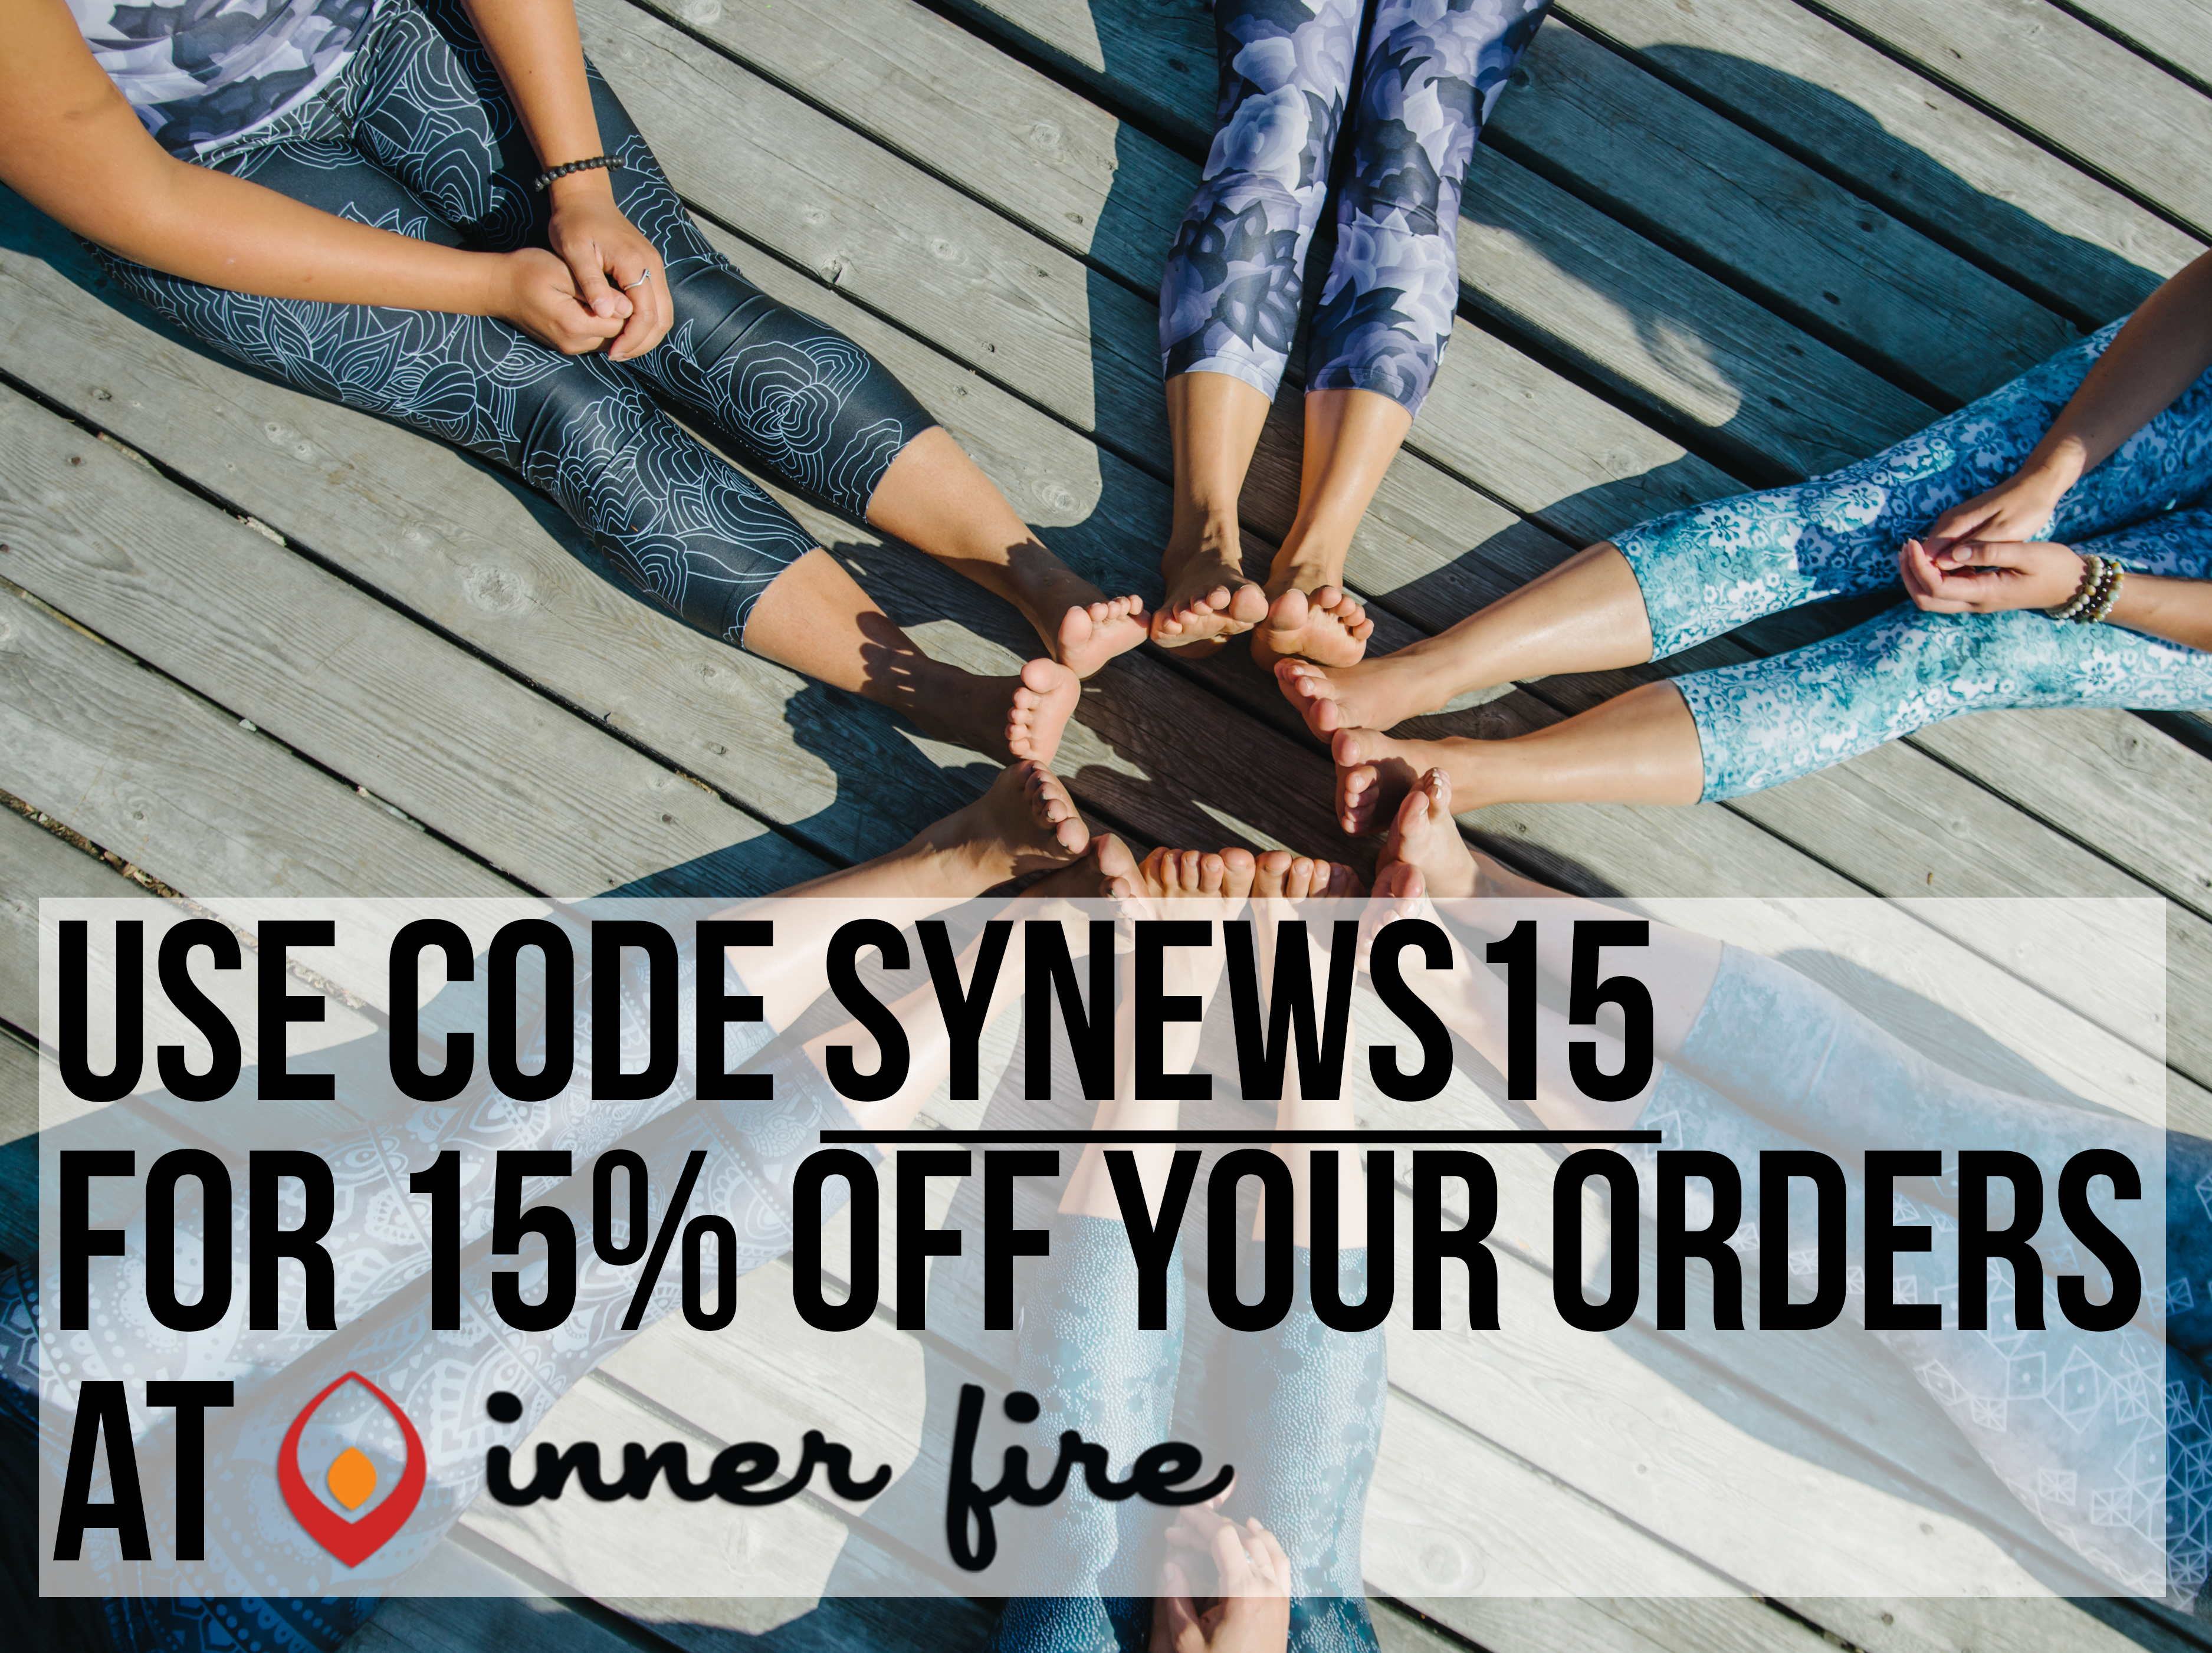 Use Inner Fire coupon code SYNEWS15 and save 15% off your orders